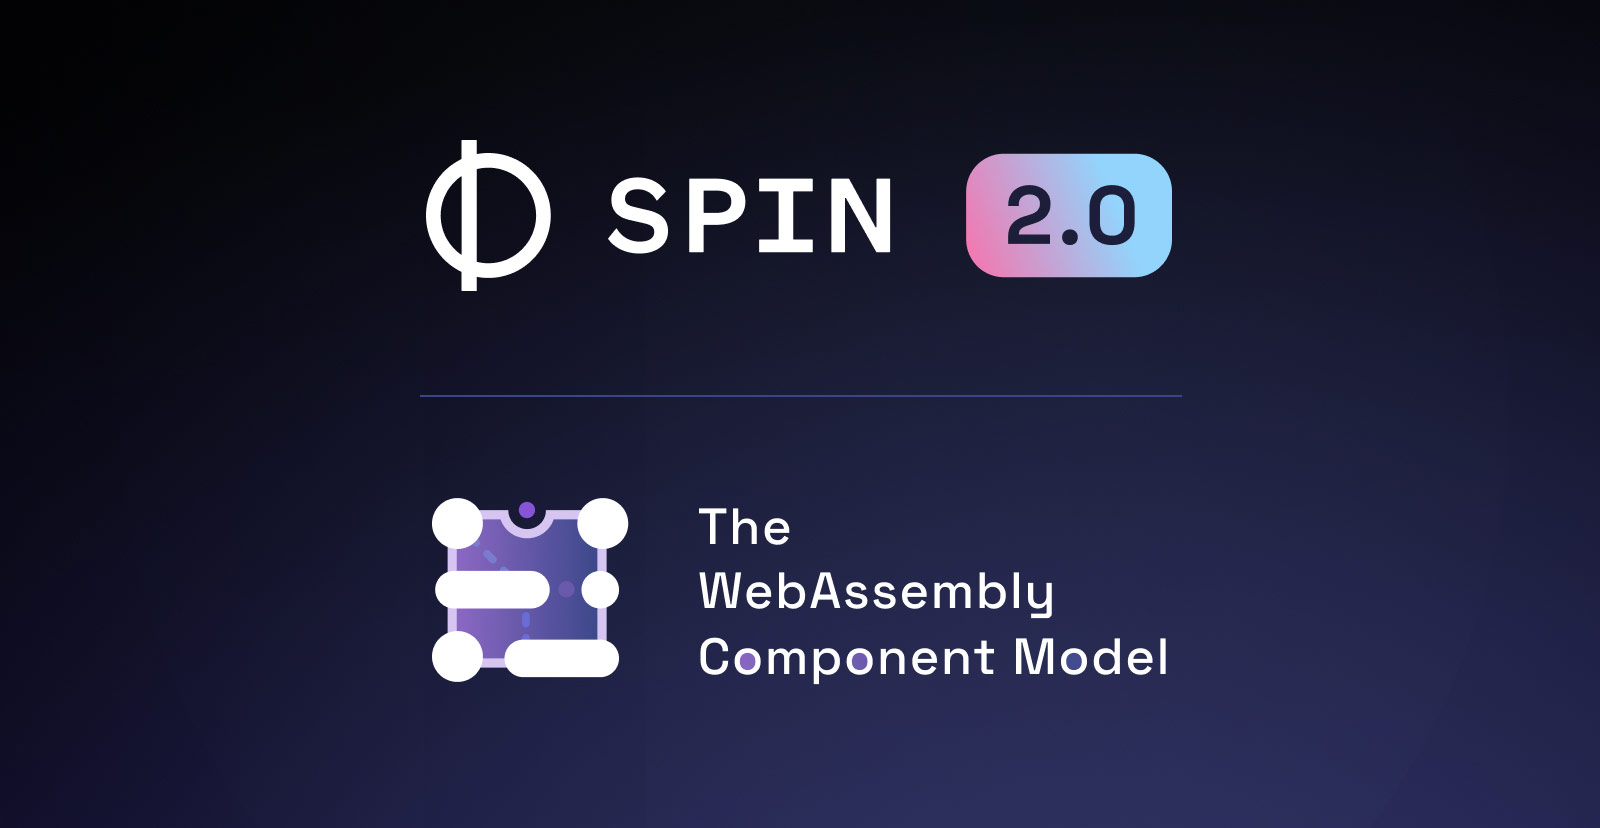 Composing Components with Spin 2.0